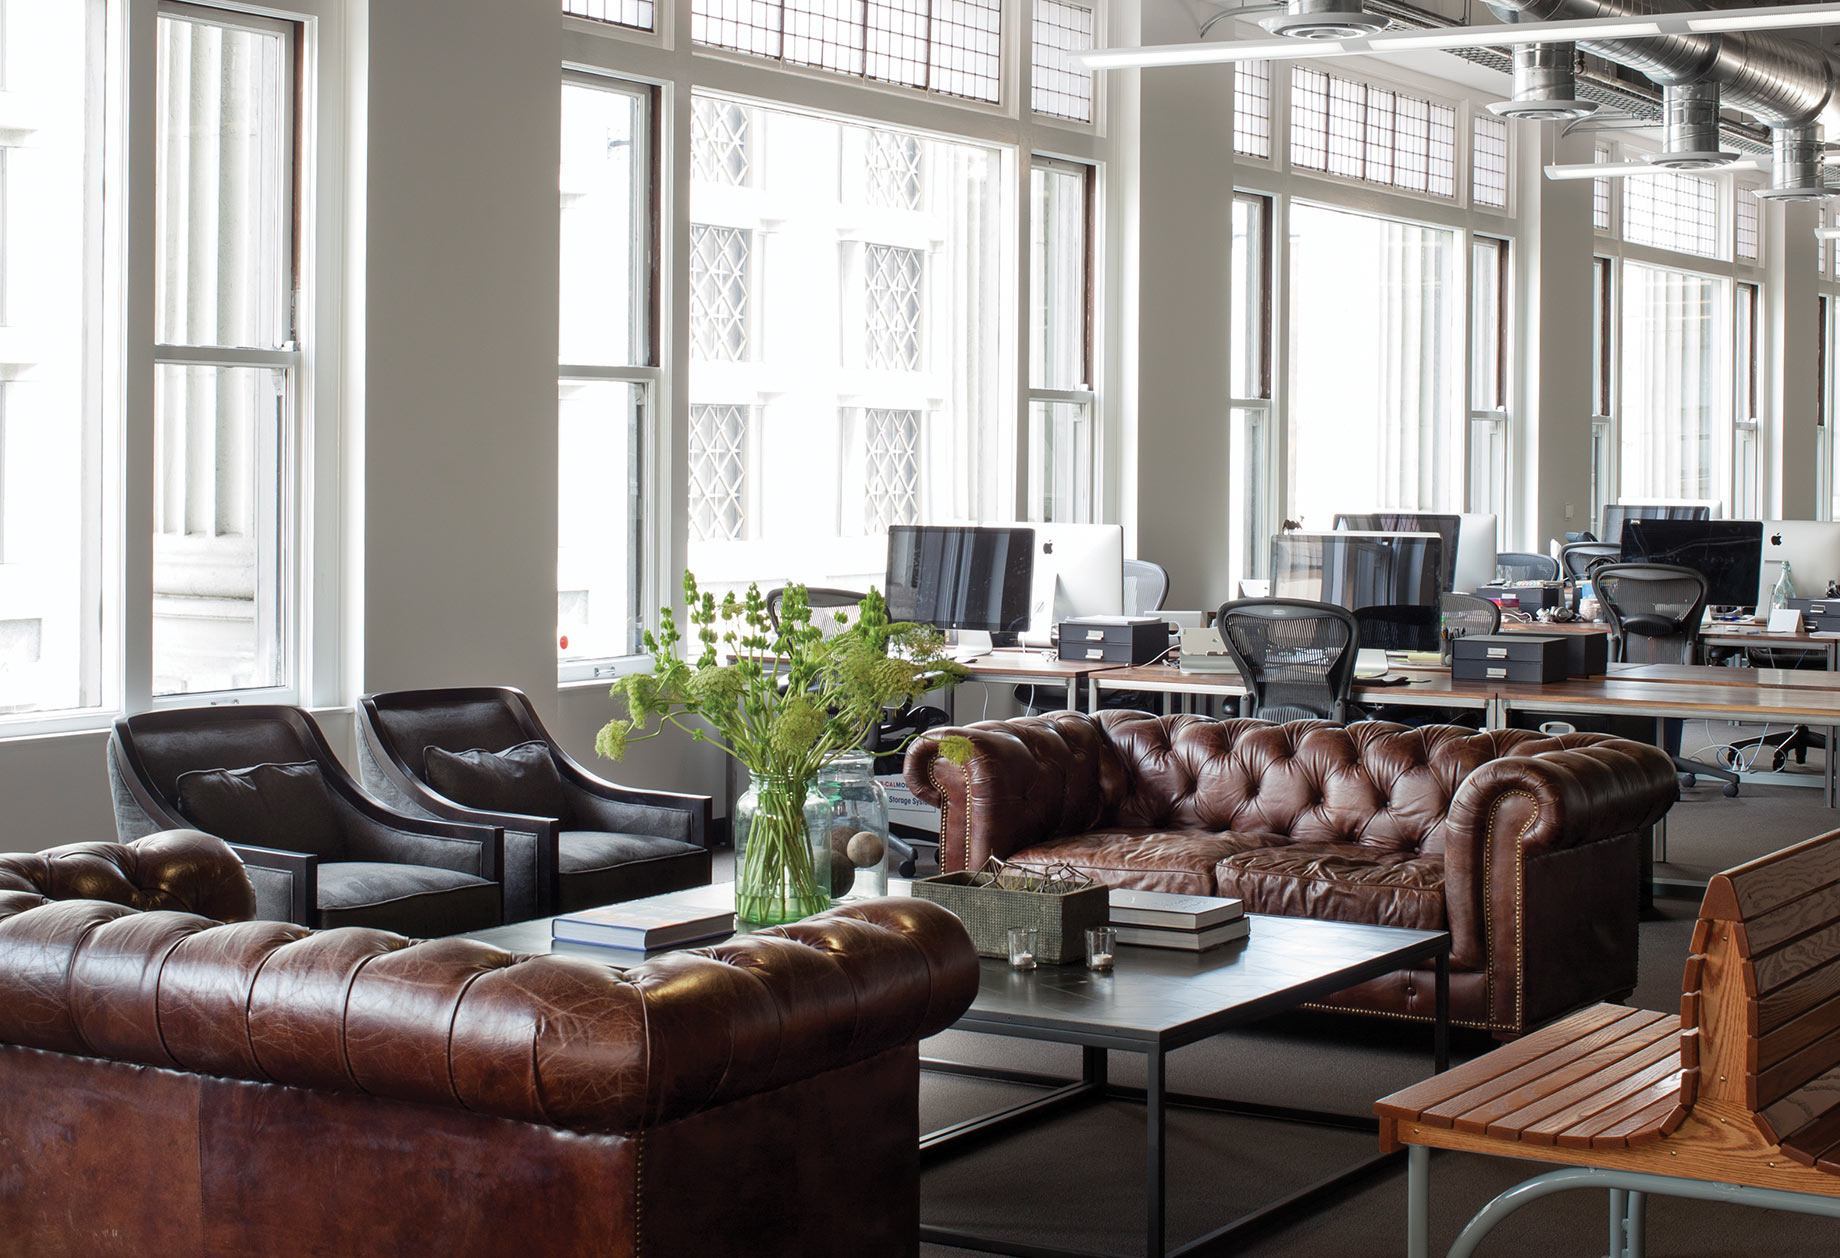 Take a Tour of of HotelTonight’s San Francisco Headquarters